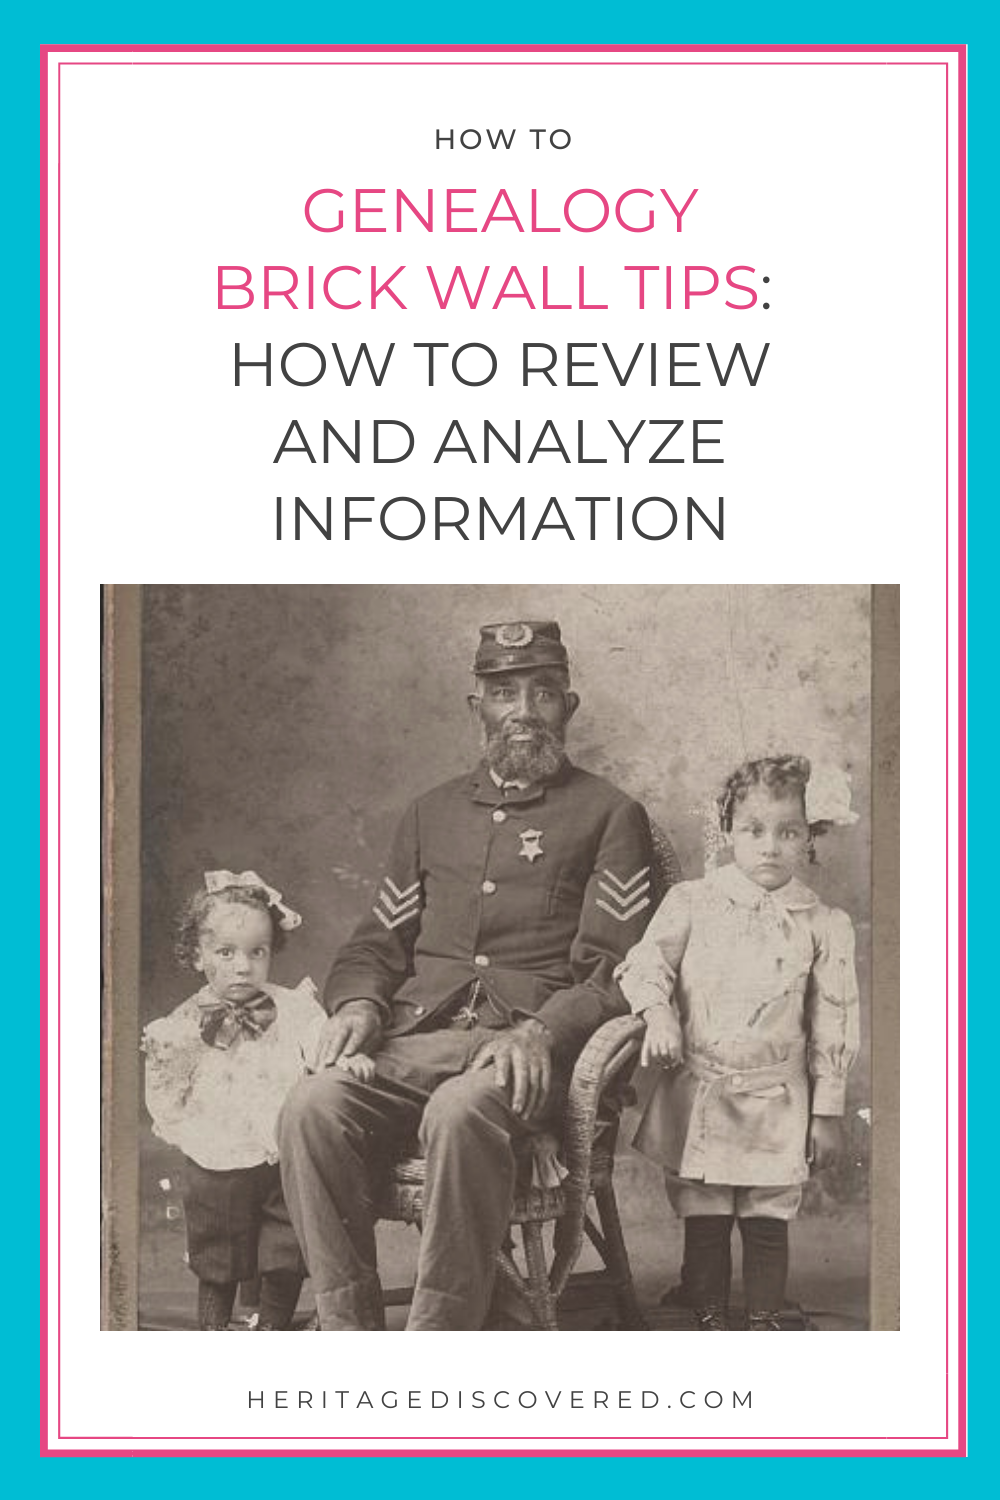 genelogy-brick-wall-tips-review-analyze-information.png